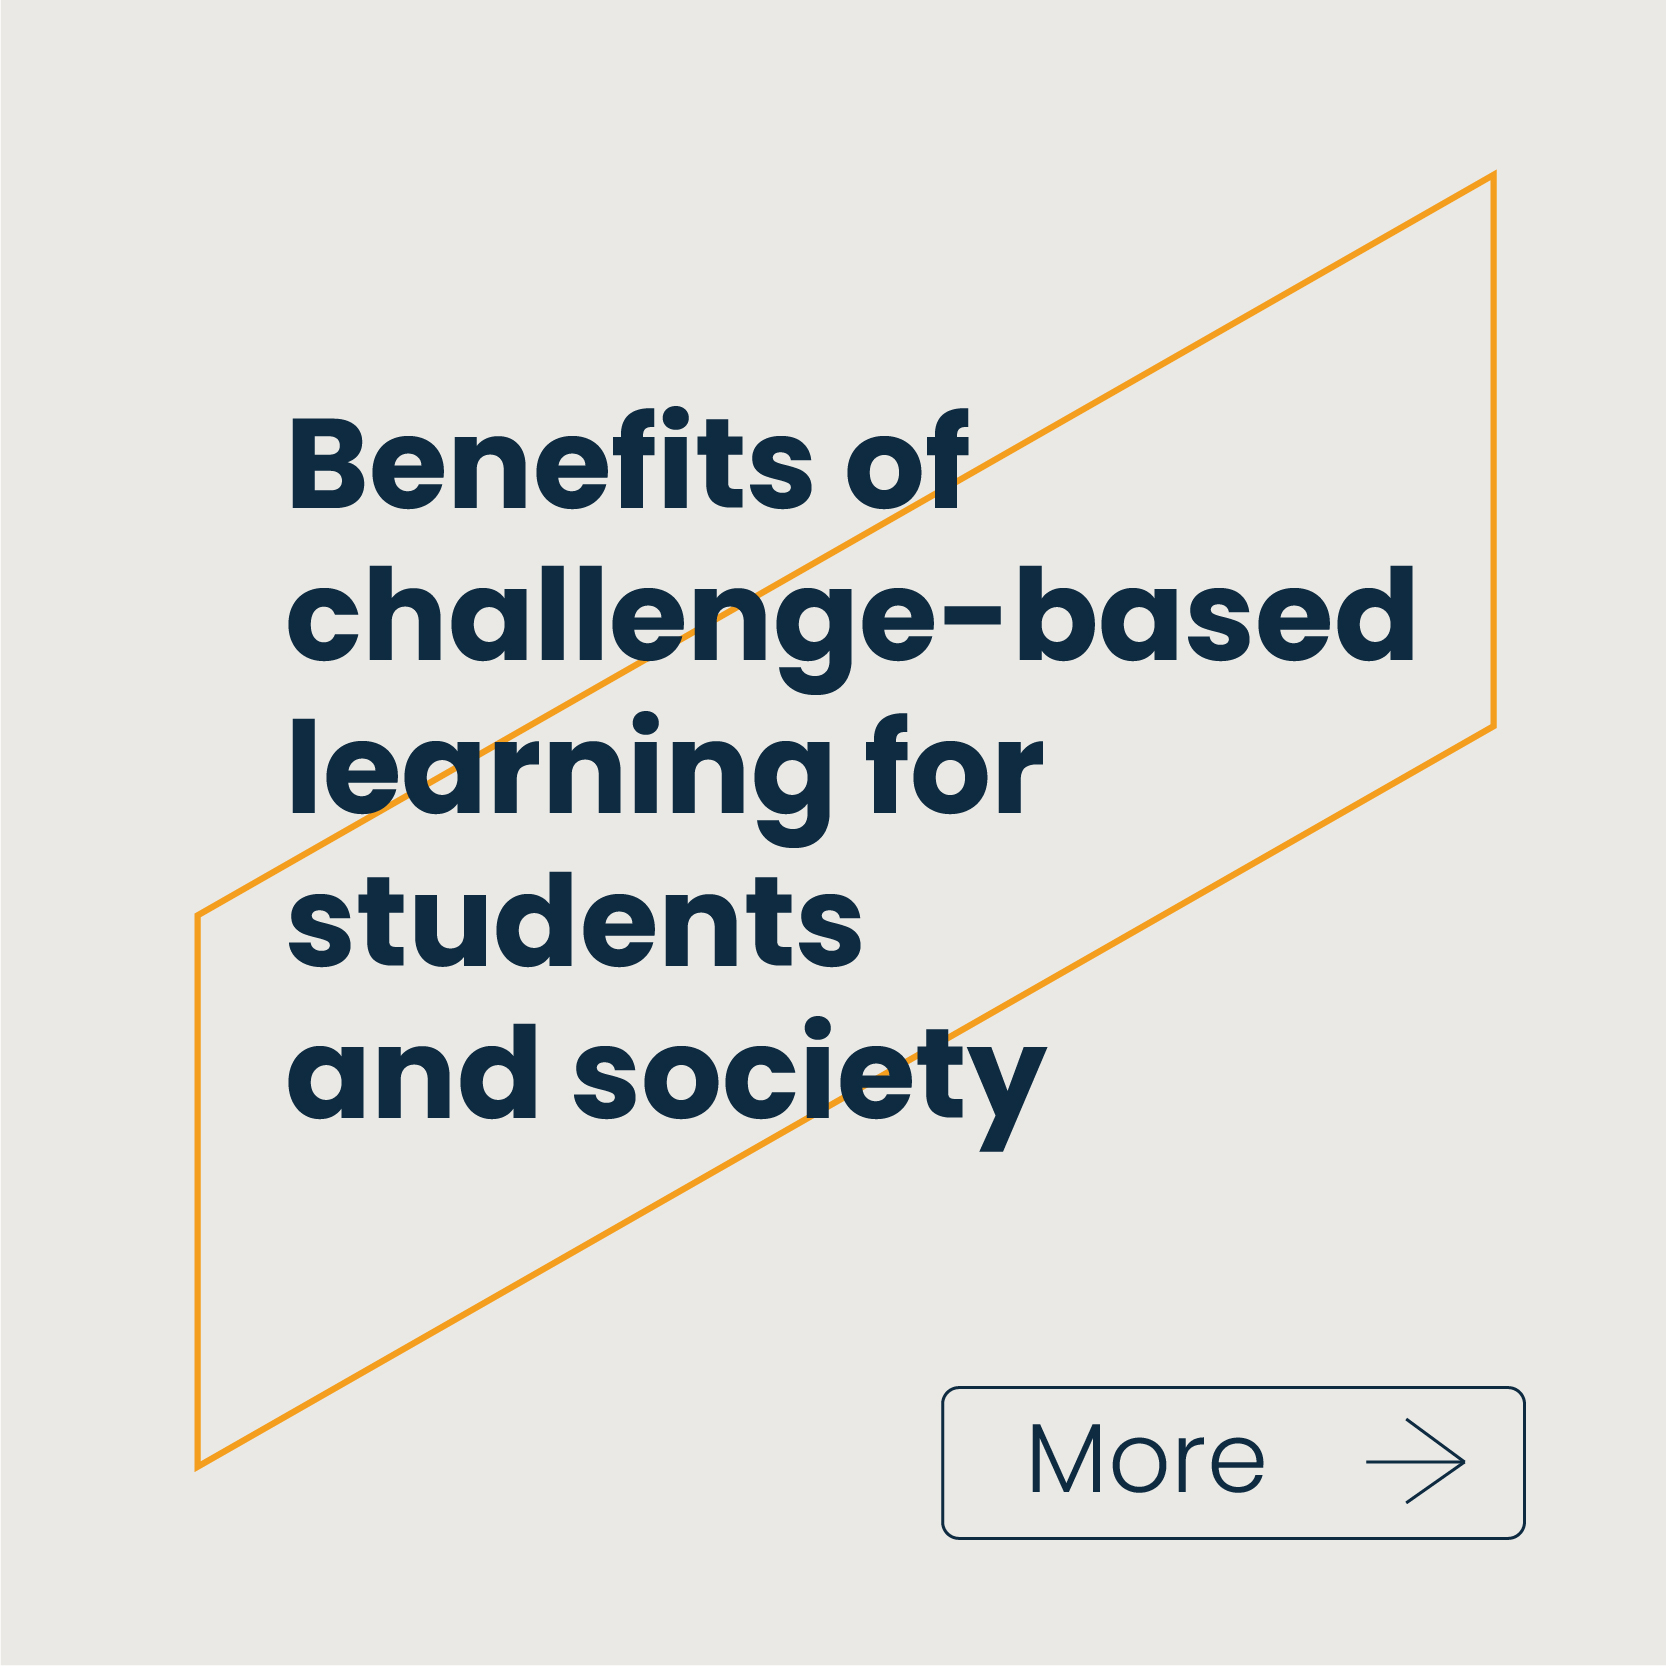 Link to Benefits of challenge-based learning for students and society